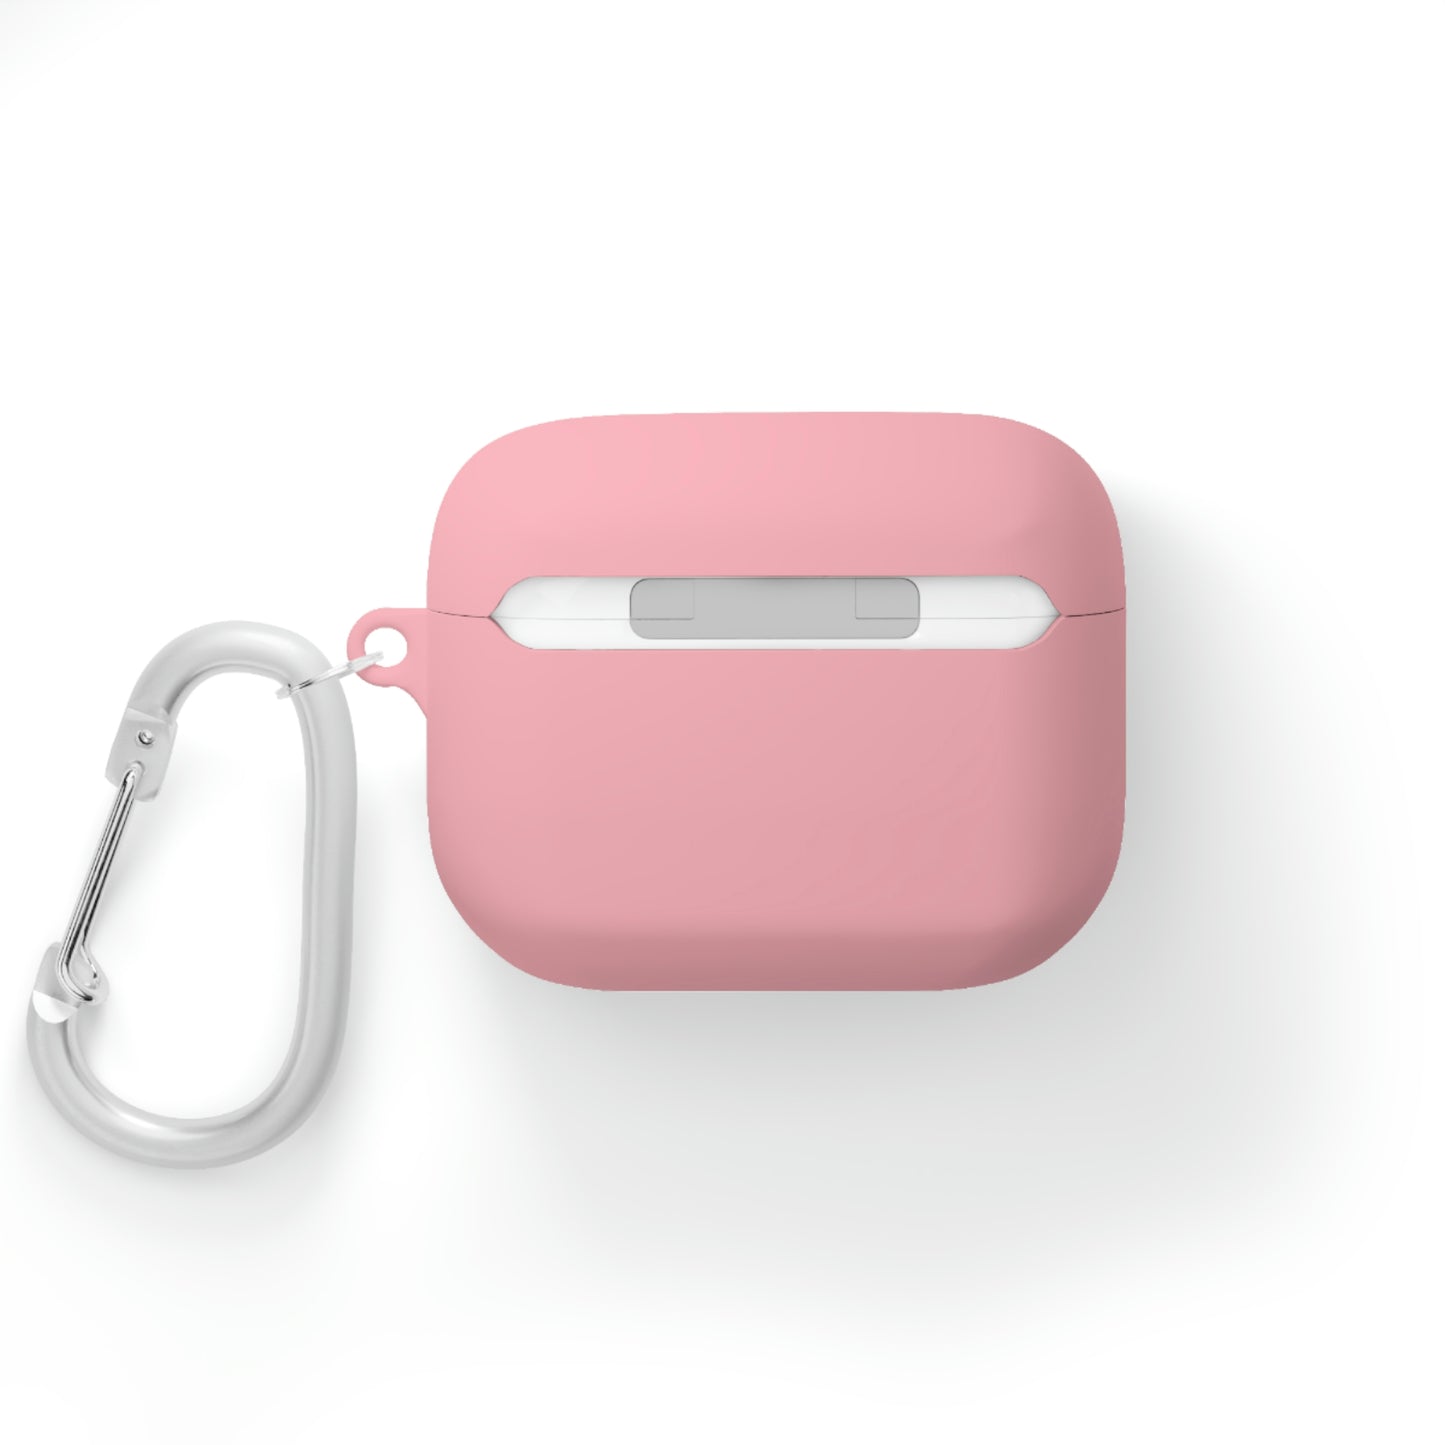 Square and Compasses AirPods and AirPods Pro Case Cover